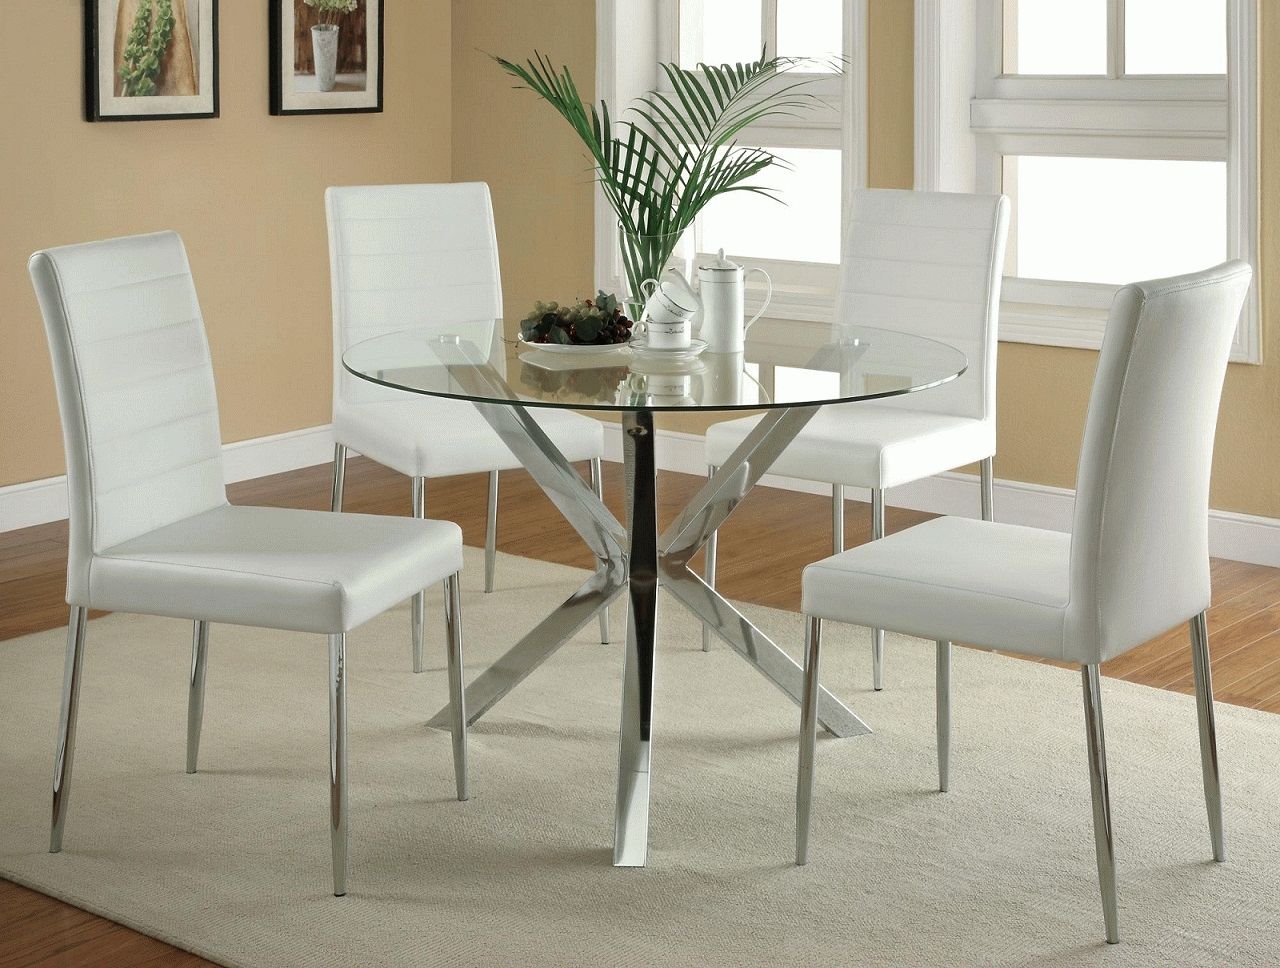 Current Set Chrome / Glass Dining Table W/ Black Or White Chairs Inside Glass Dining Tables White Chairs (View 3 of 25)